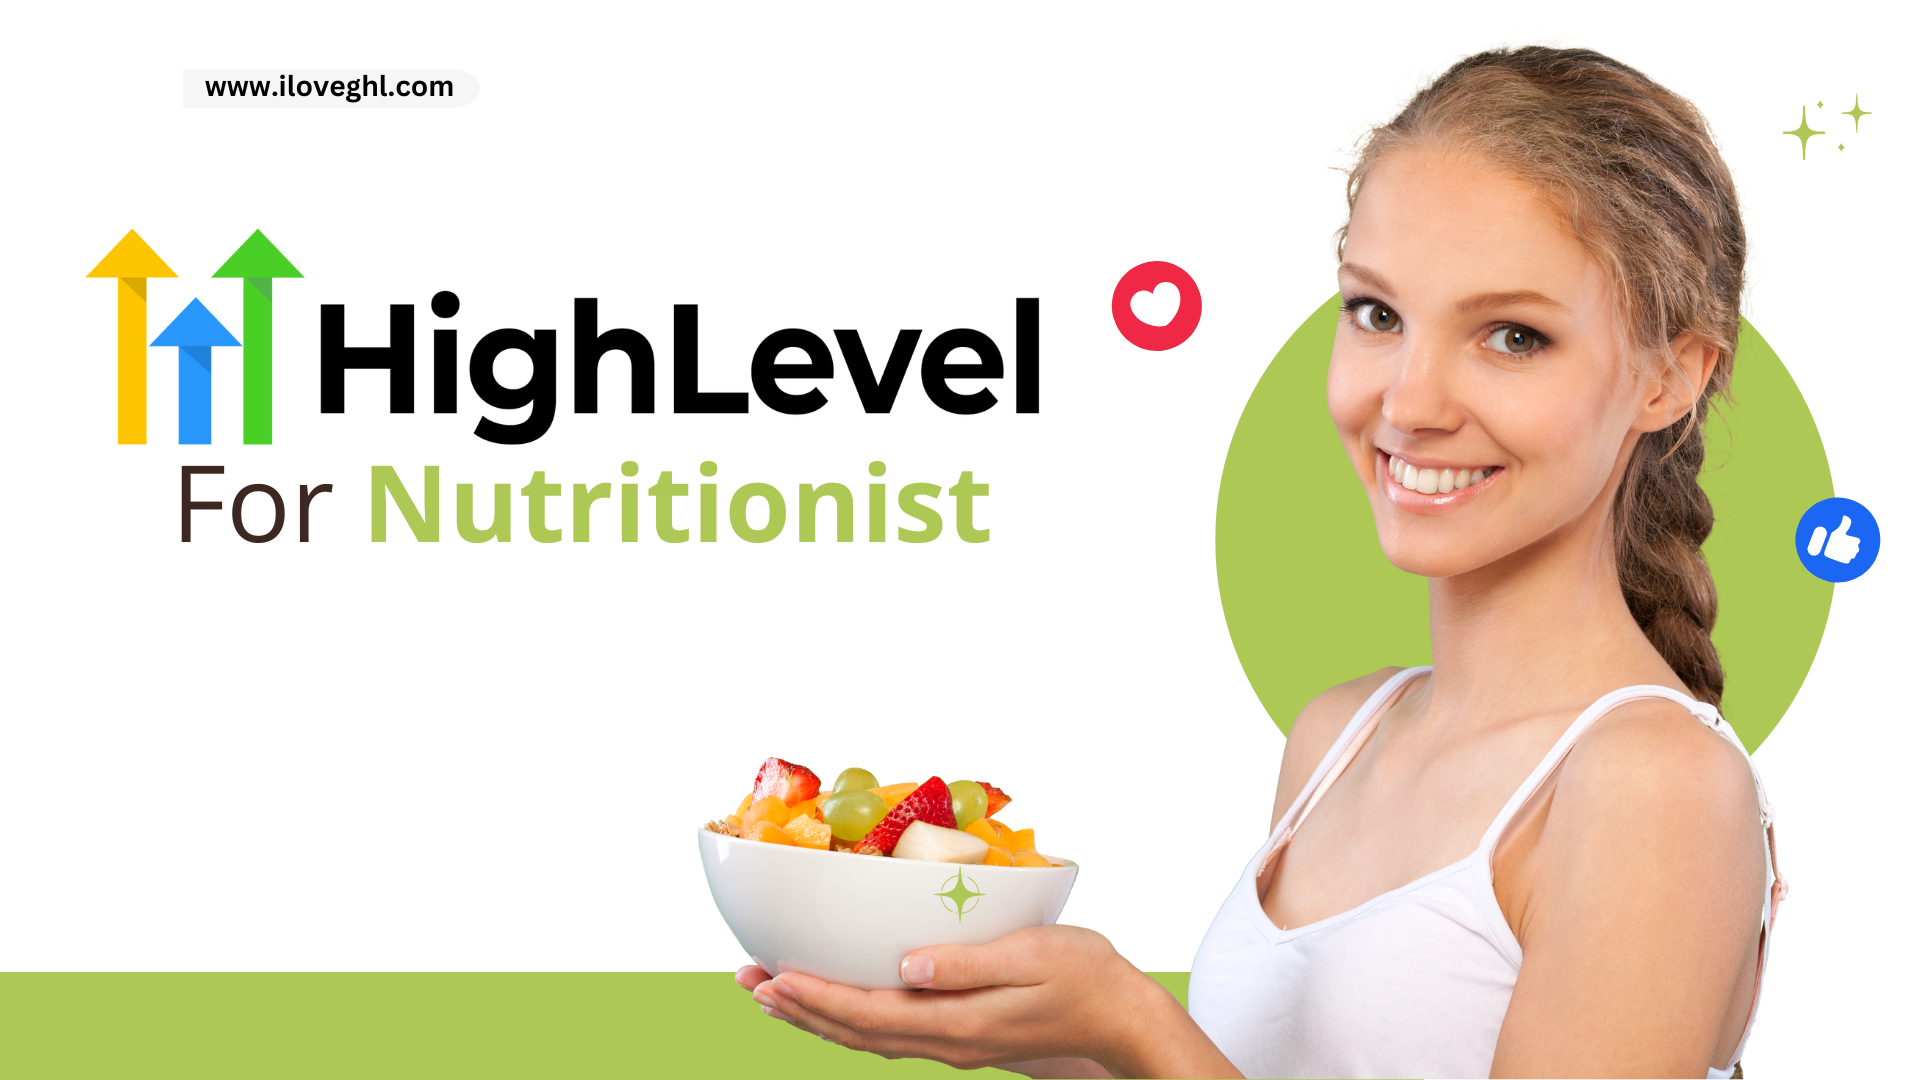 GoHighLevel for Nutritionist